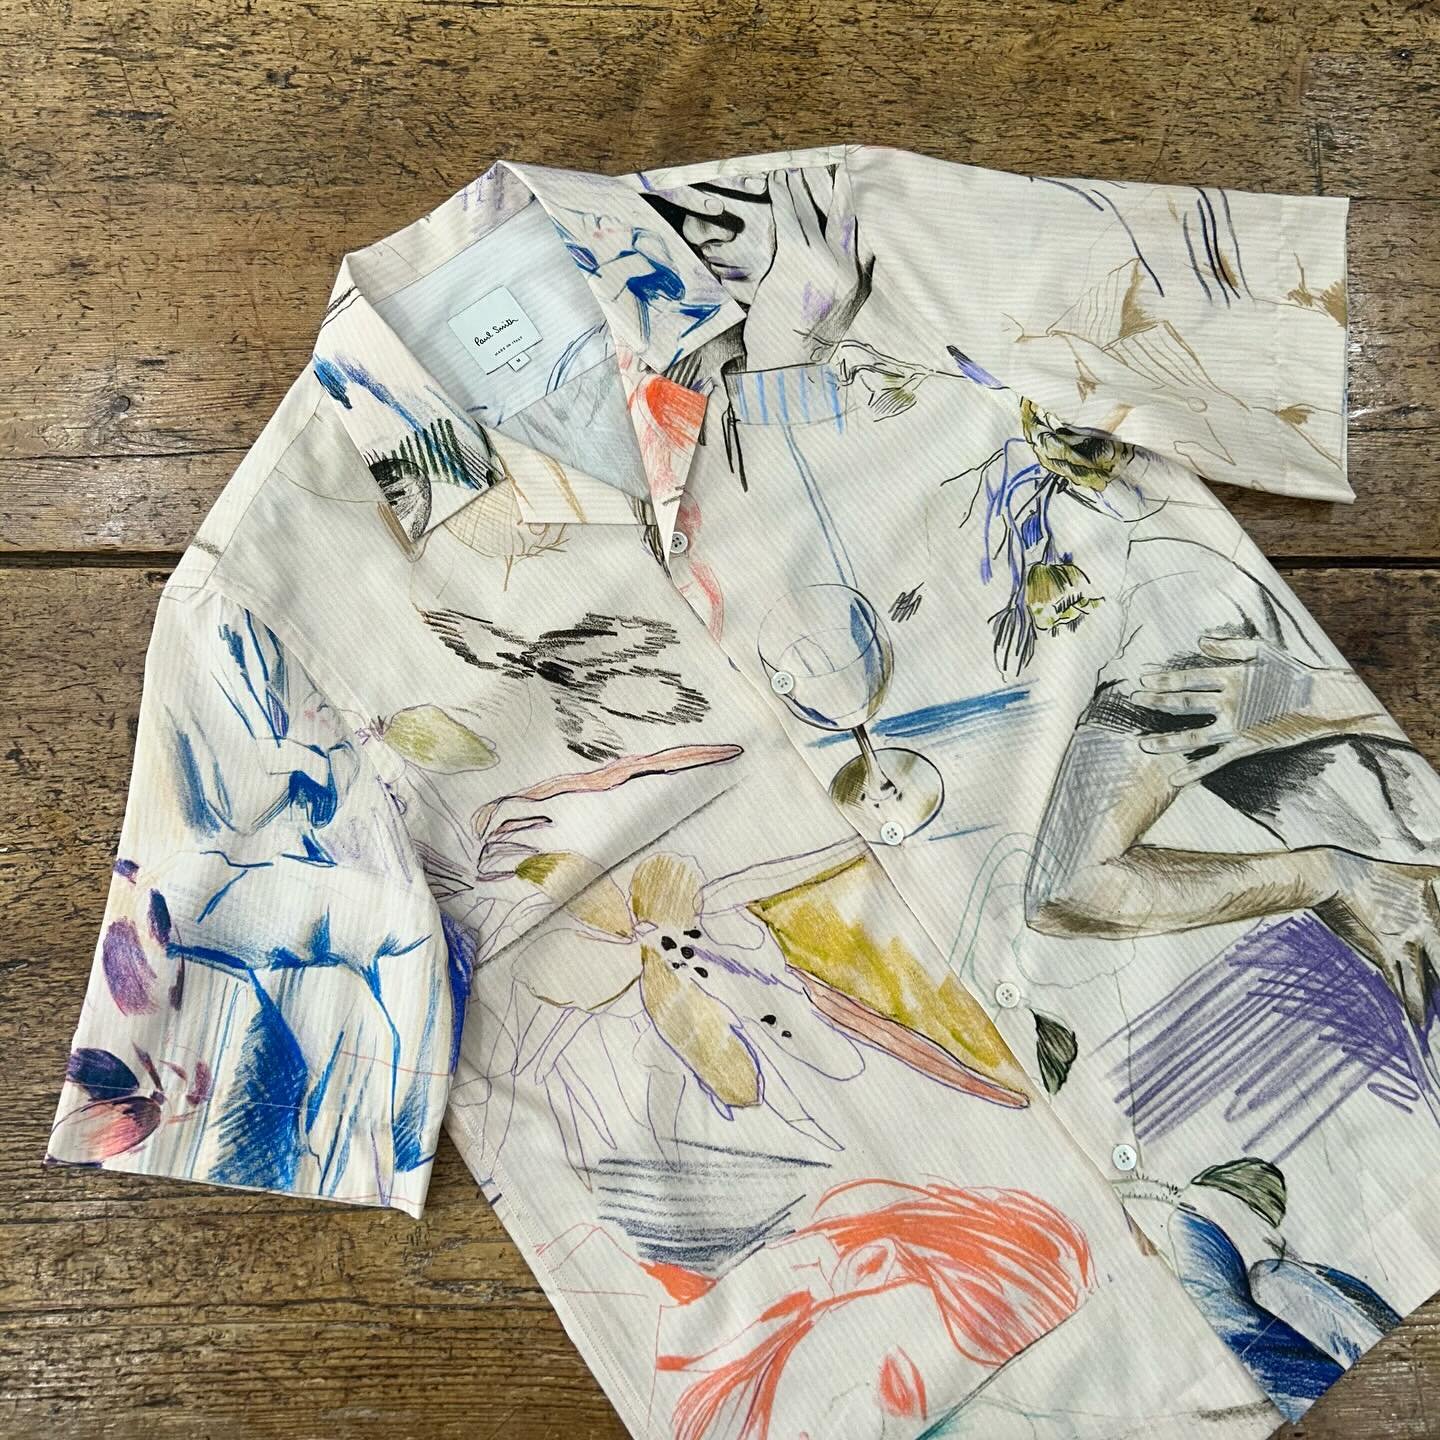 Paul Smith Mainline is quickly becoming a fan favourite in store and with this latest drop for the summer it&rsquo;s easy to see why. Mainly made in Italy or Portugal, Paul Smith Mainline simply is luxury and quality. From fun prints to sharp polo sh